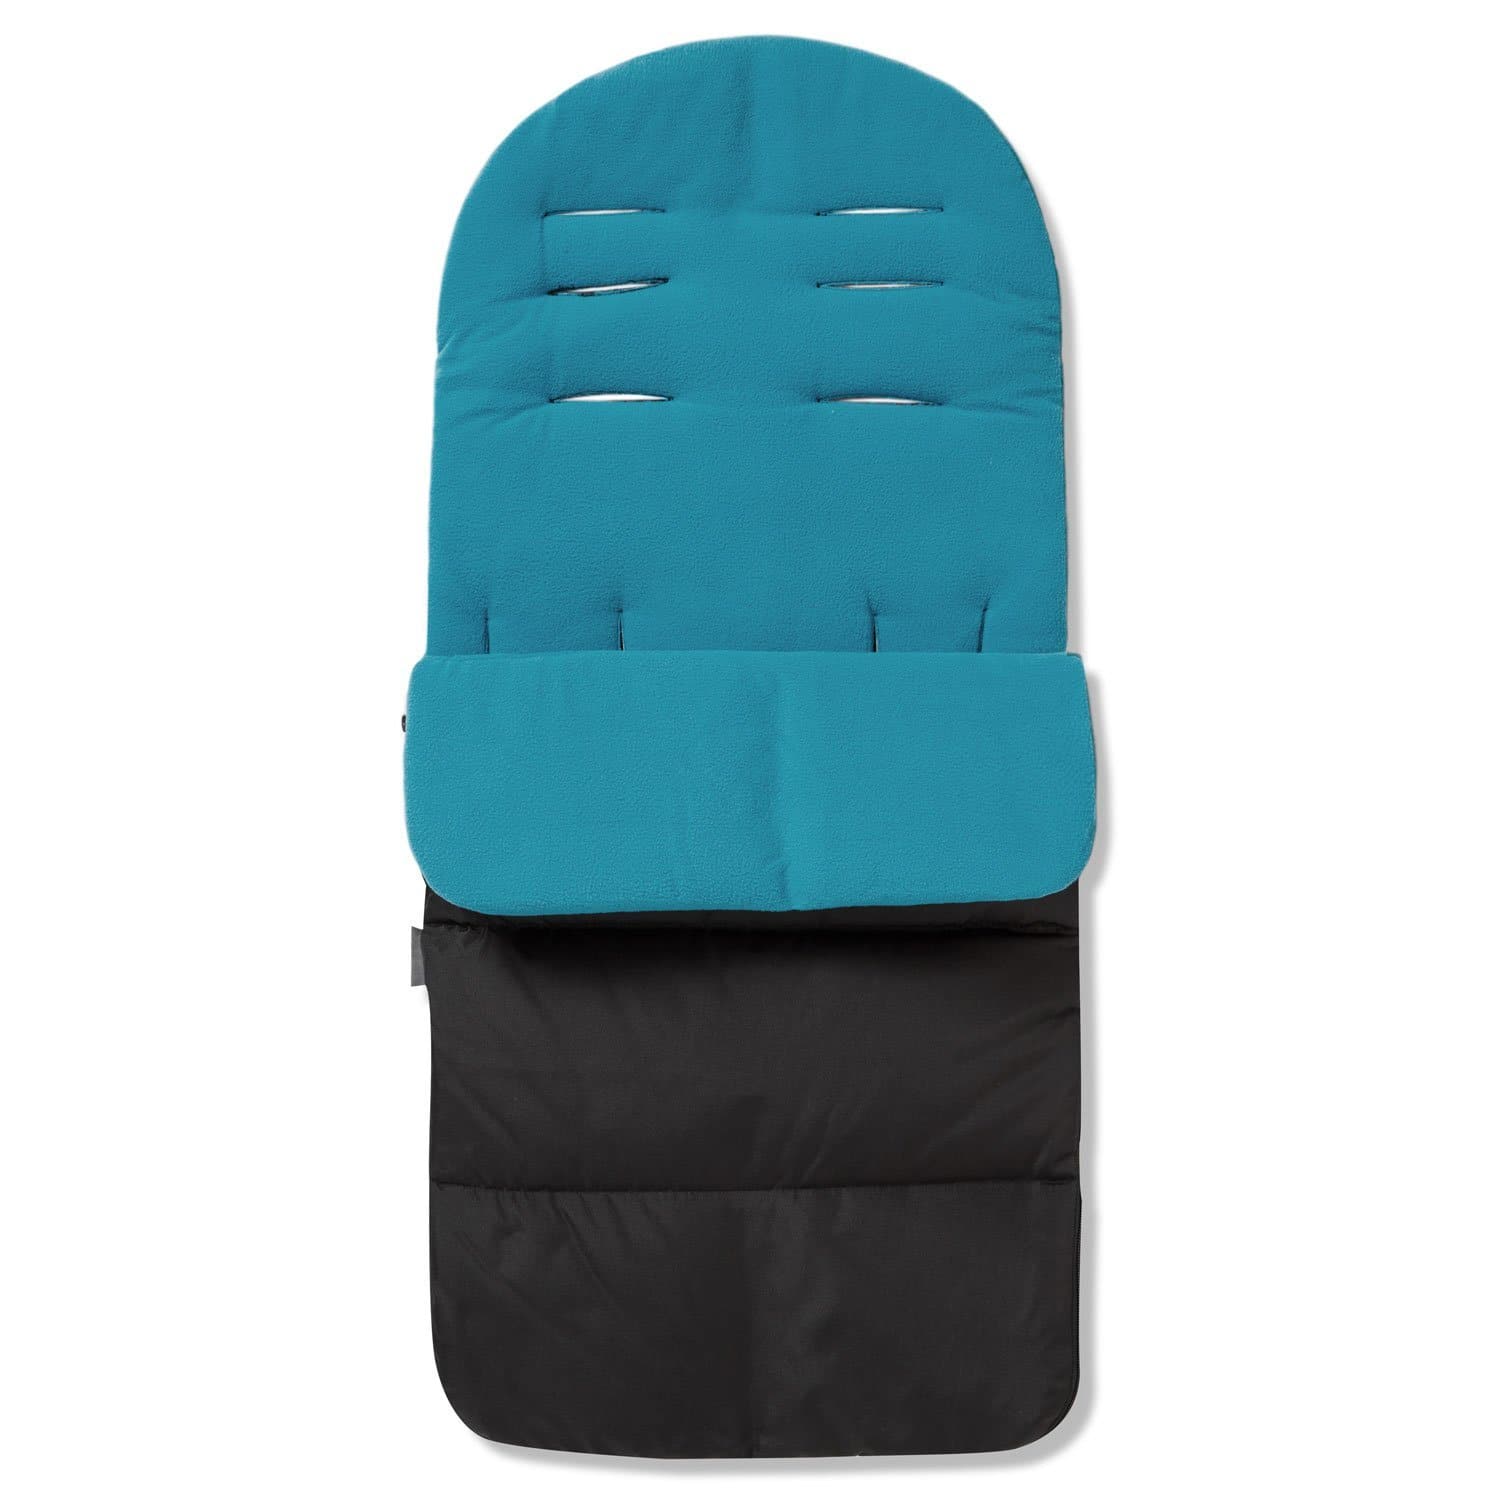 Premium Footmuff / Cosy Toes Compatible with Roma - Ocean Blue / Fits All Models | For Your Little One